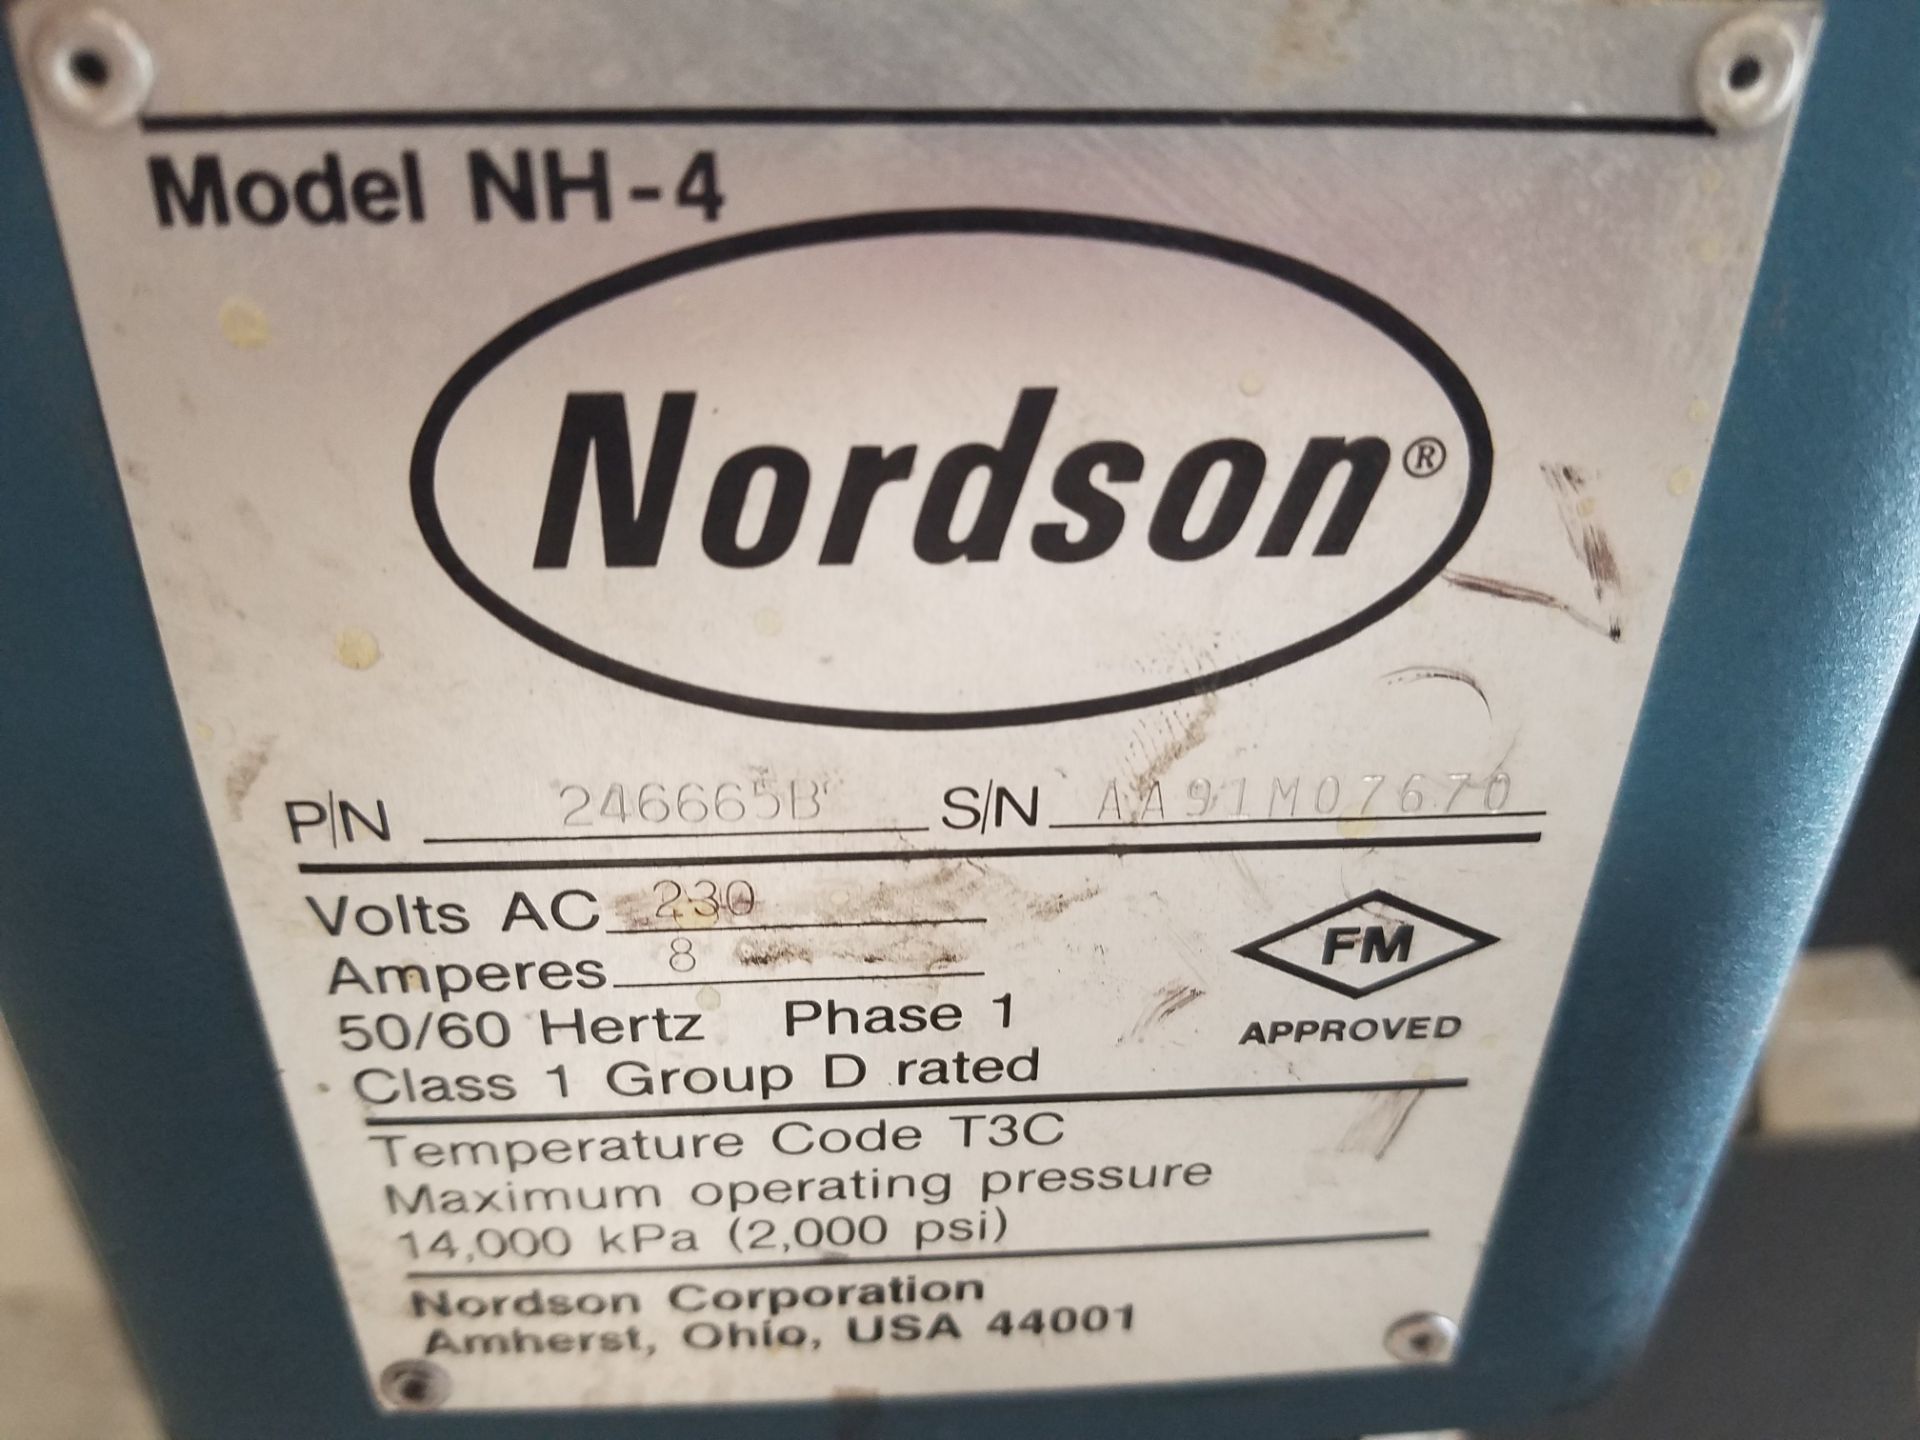 Nordson Fluid Heater, Model NH-4, P/N 246665B, S/N AA91M07670, Volt 230, Single Phase - Image 5 of 5